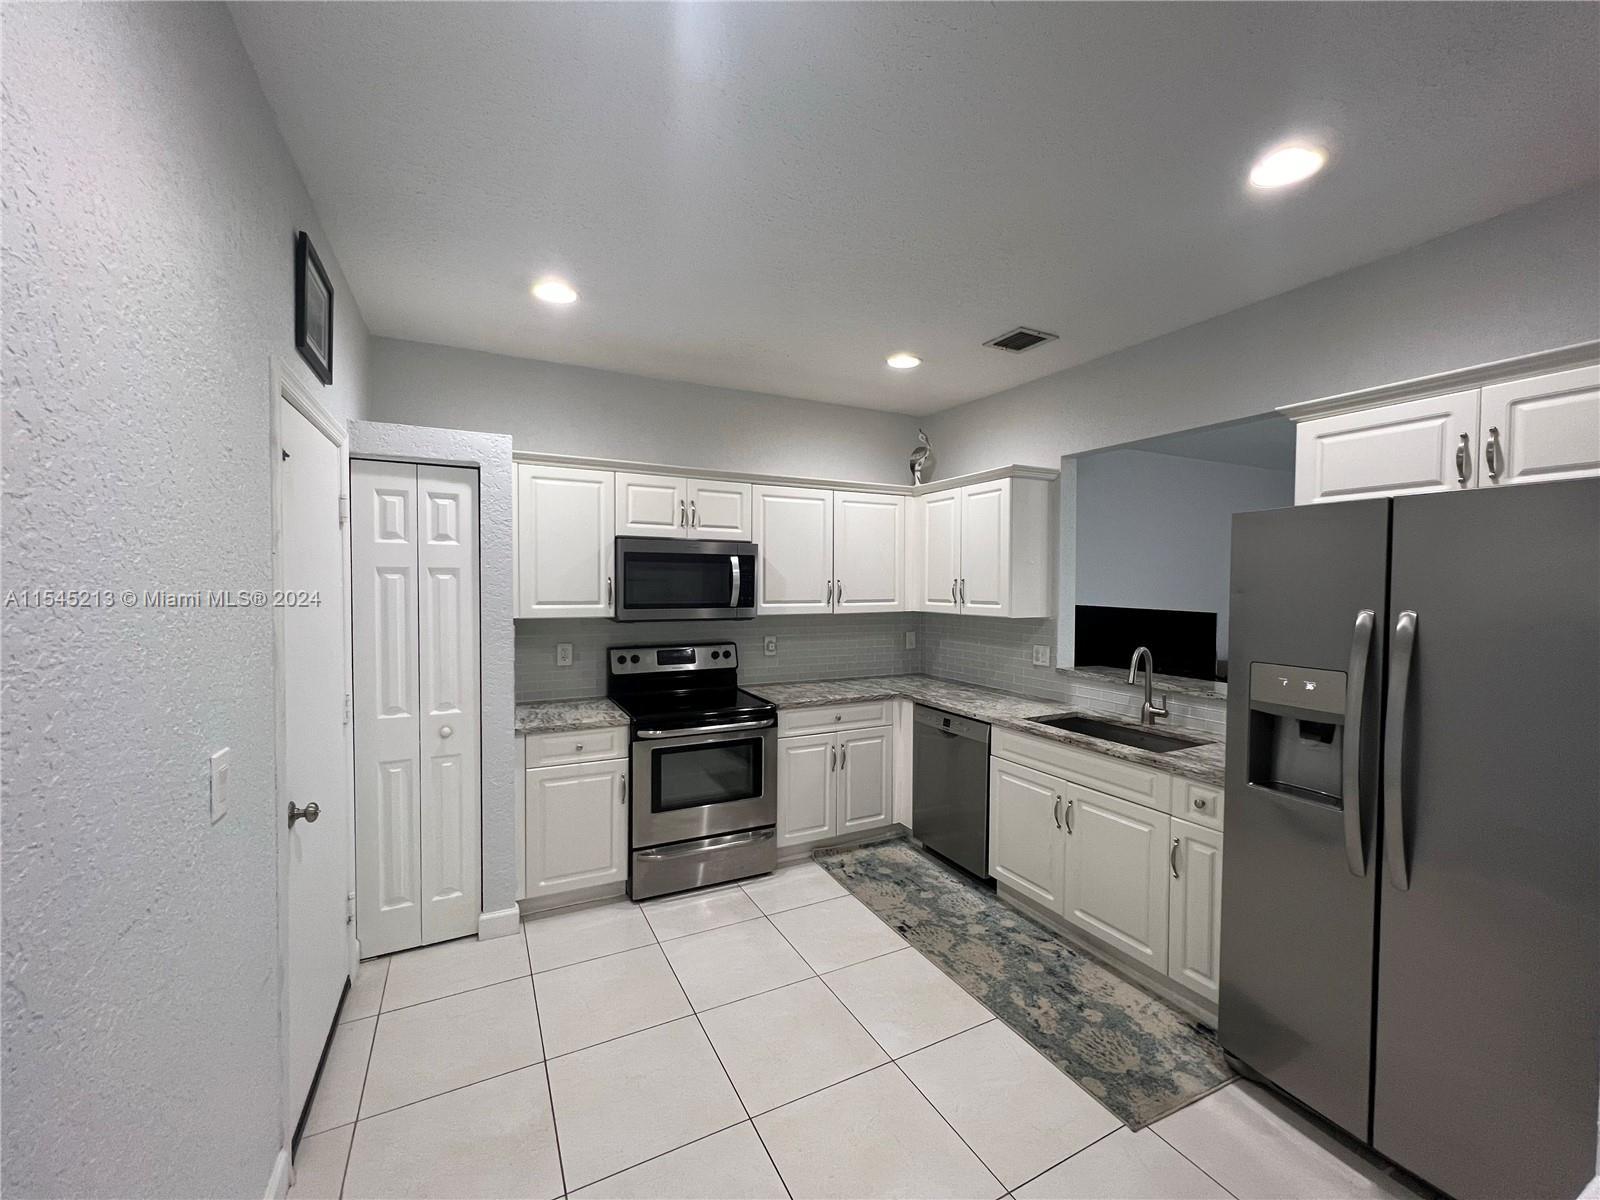 Photo of 5549 NW 90th Ave in Sunrise, FL